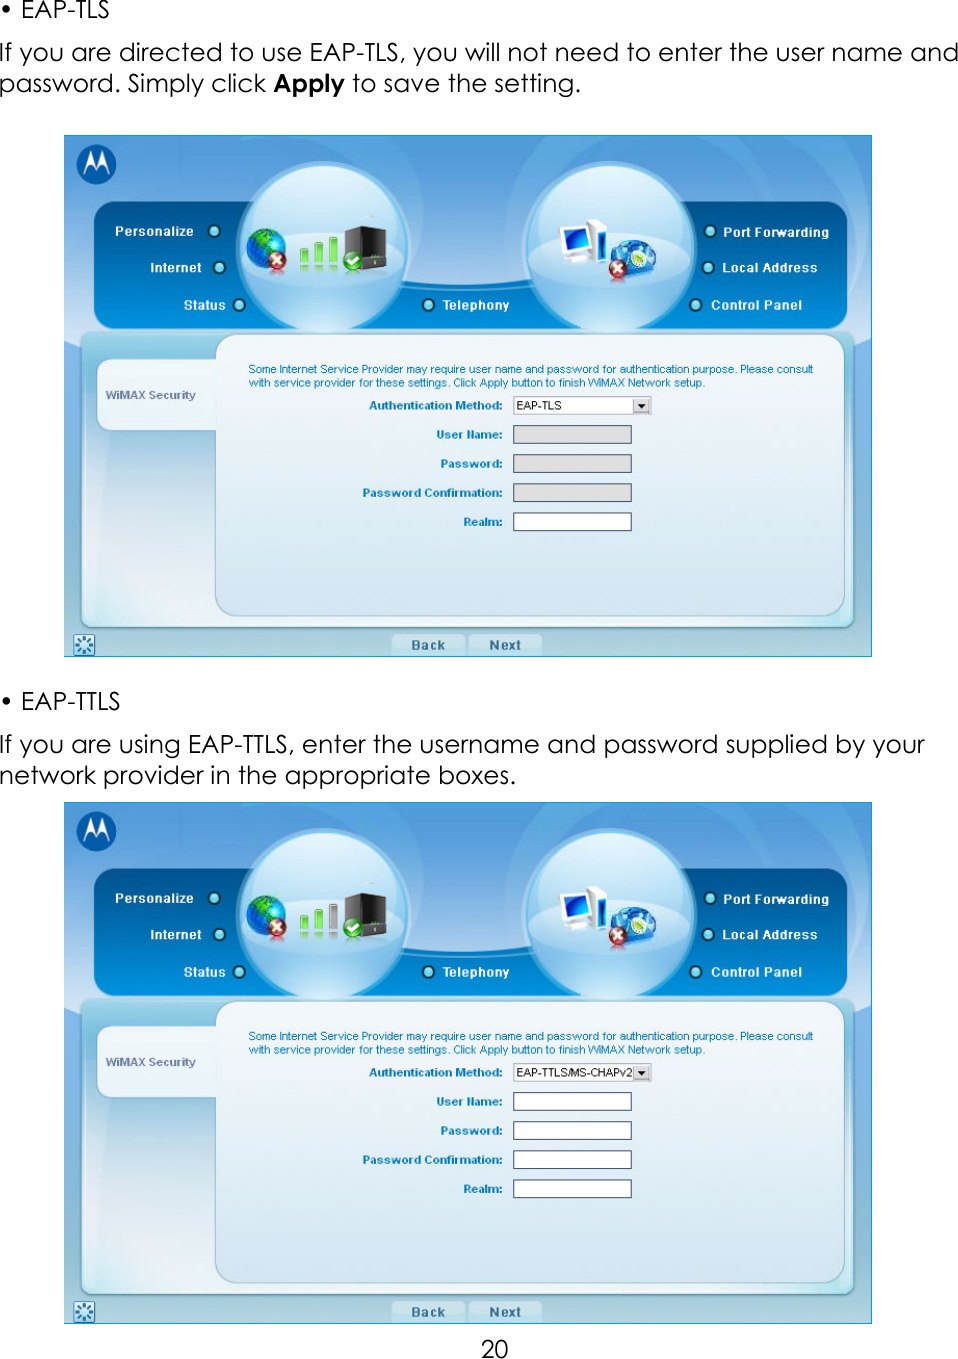     20• EAP-TLS If you are directed to use EAP-TLS, you will not need to enter the user name and password. Simply click Apply to save the setting.      • EAP-TTLS If you are using EAP-TTLS, enter the username and password supplied by your network provider in the appropriate boxes.    